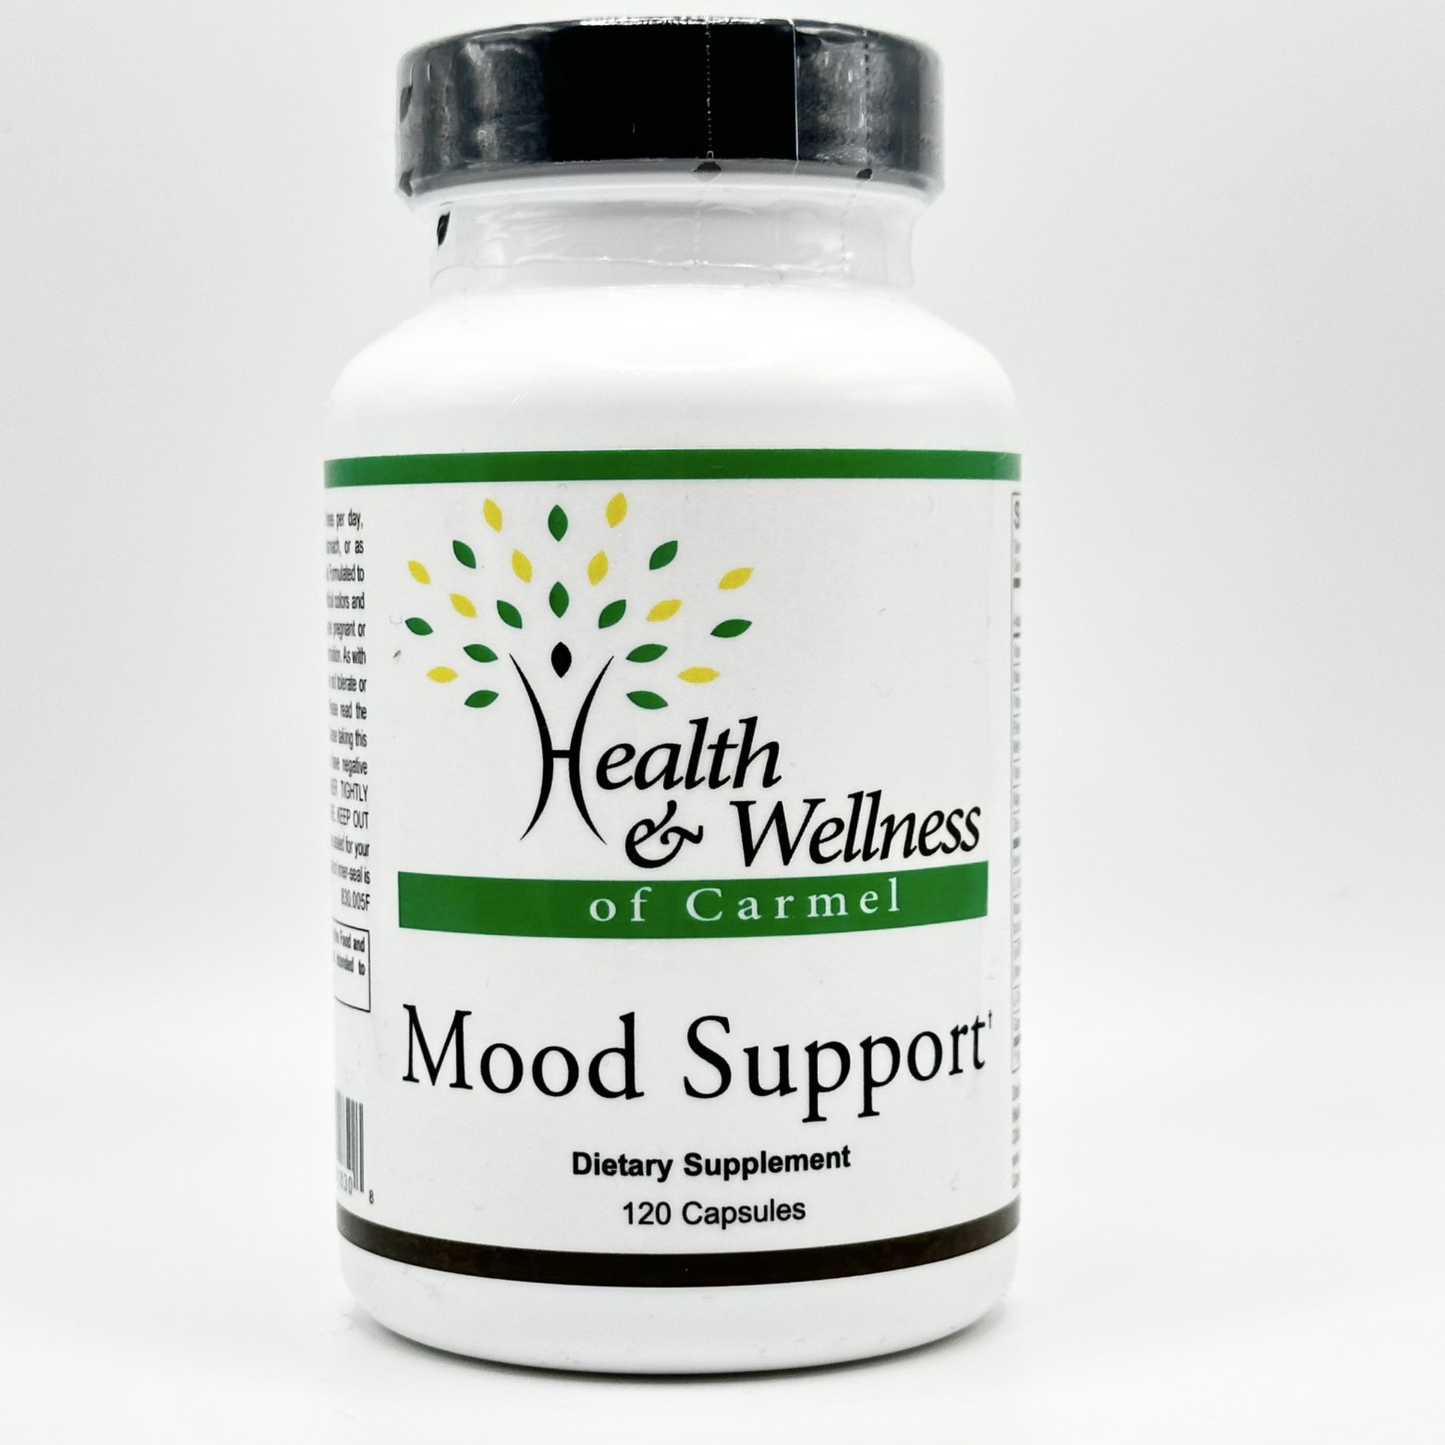 (Mood Support) 120ct